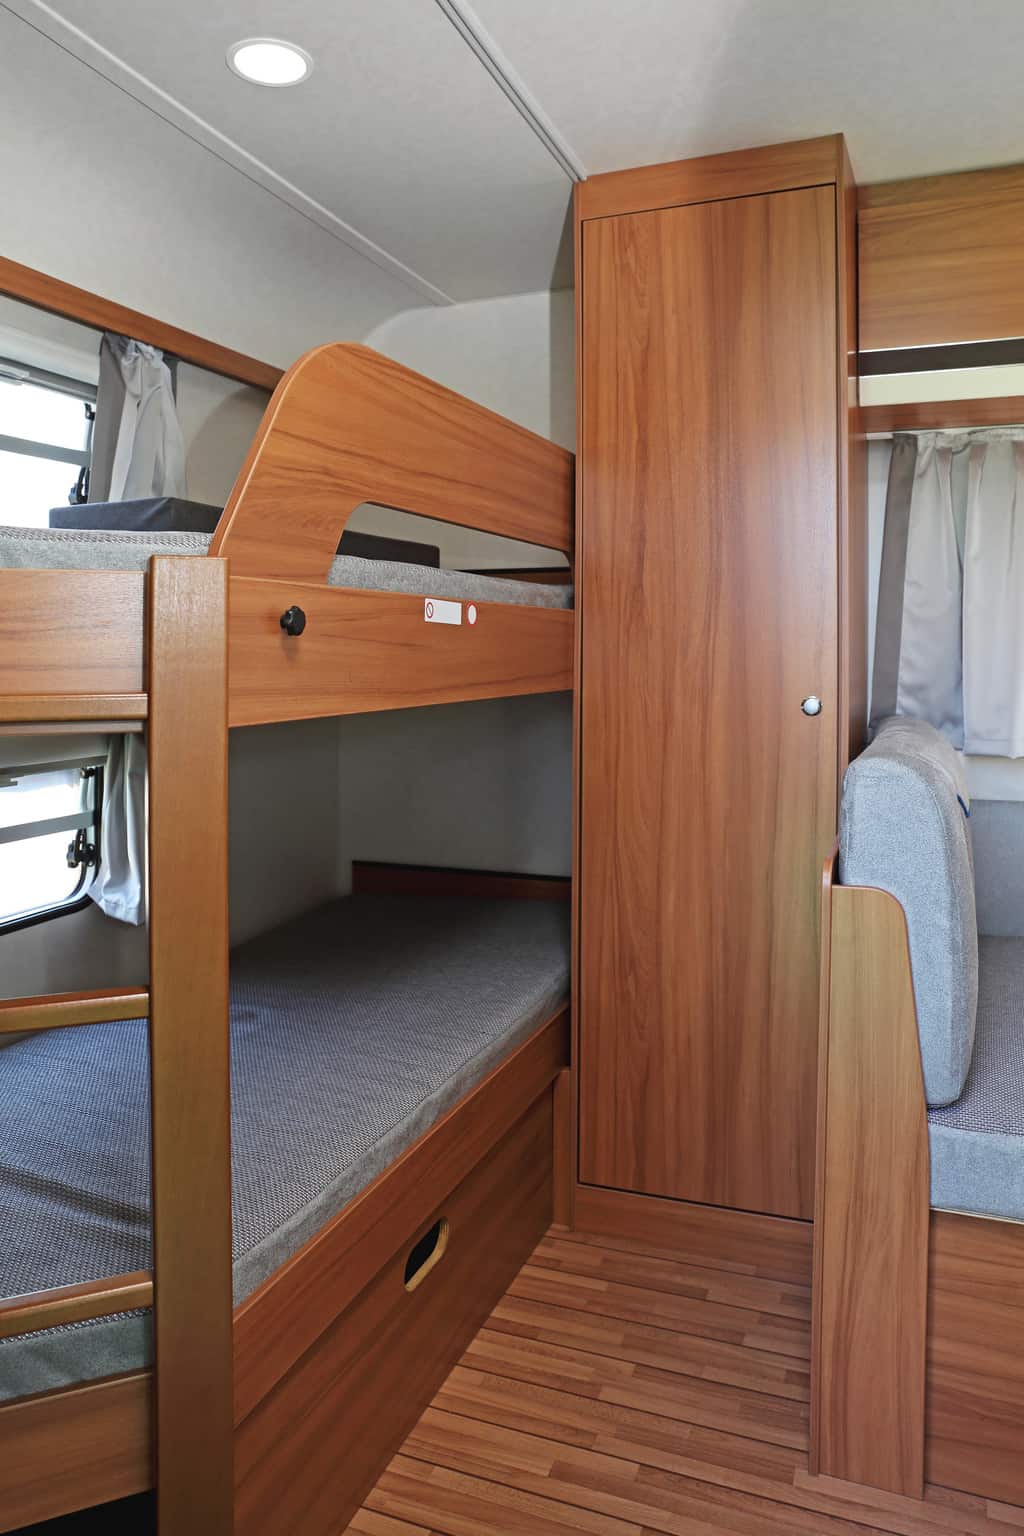 What Size Mattresses Are In Most, Rv Bunk Bed Mattress Size